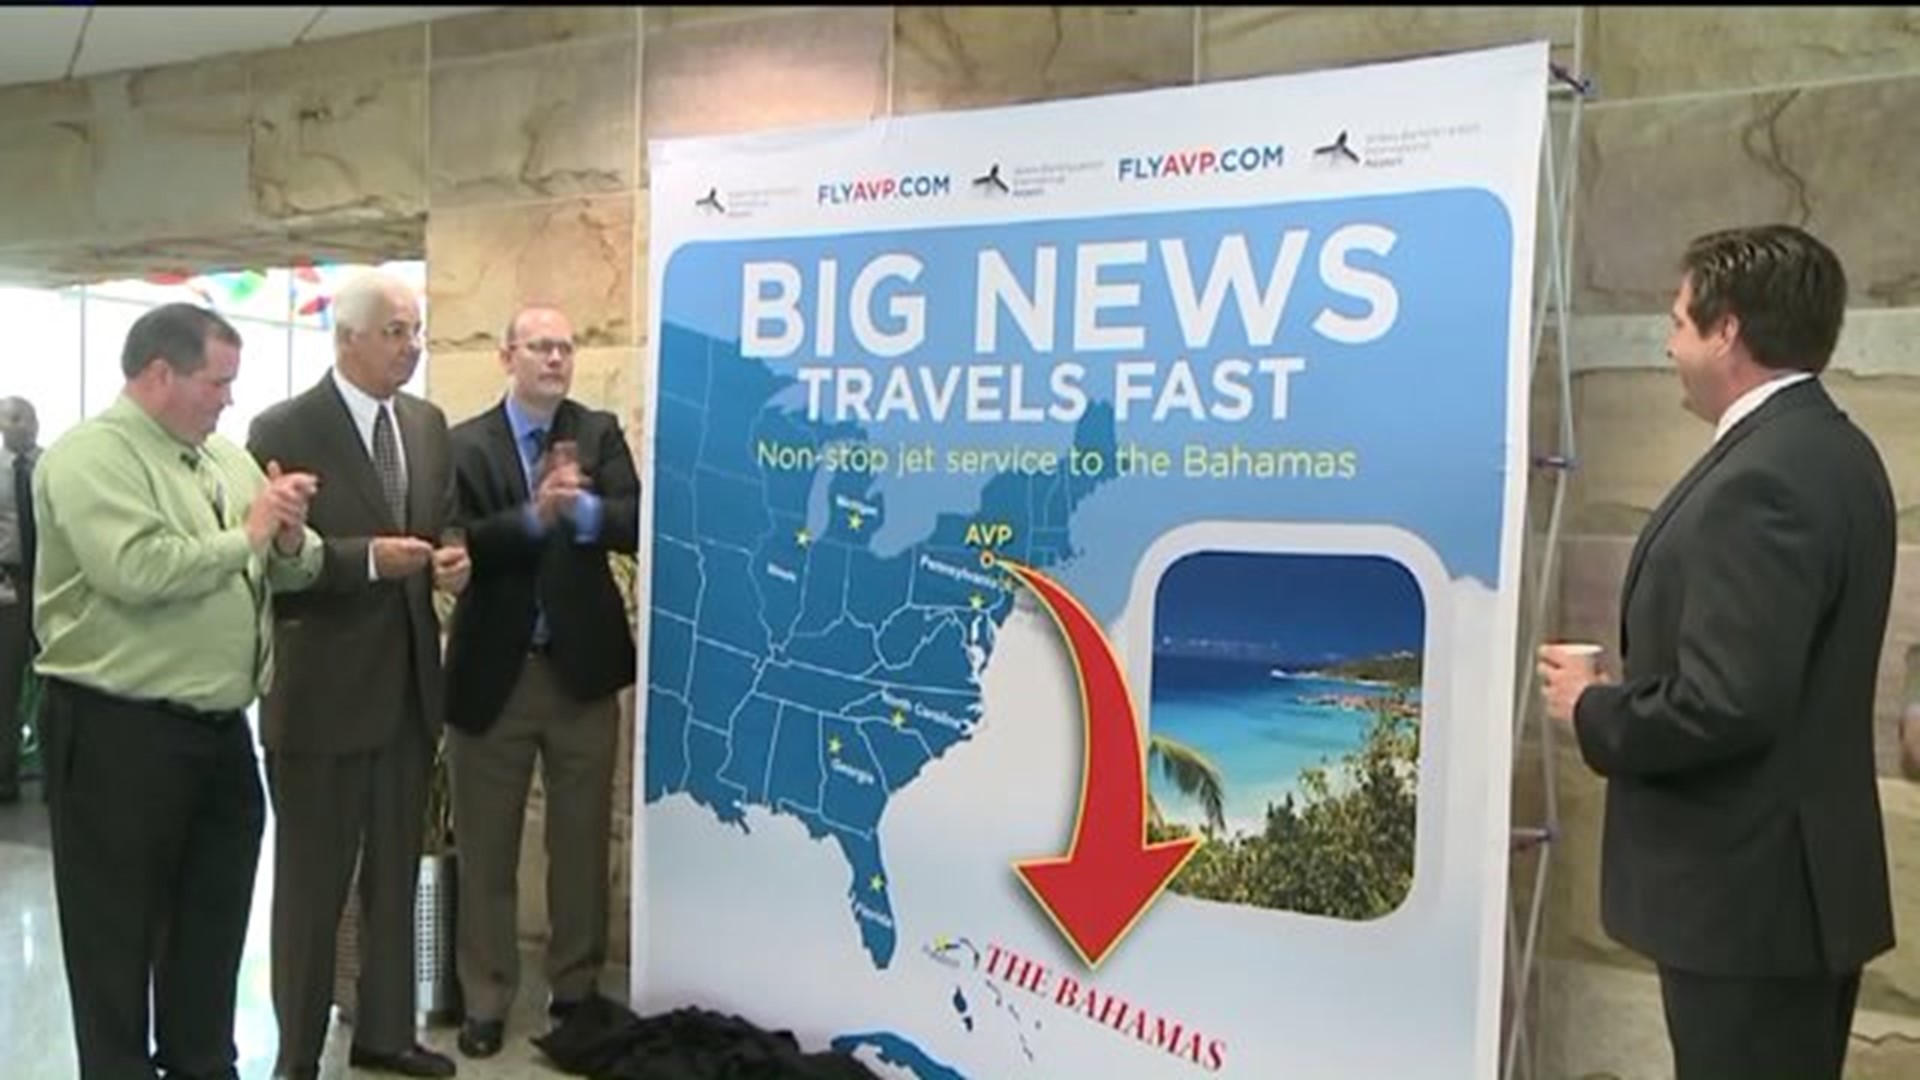 Direct Flight to Bahamas Planned from W-B/Scranton Airport